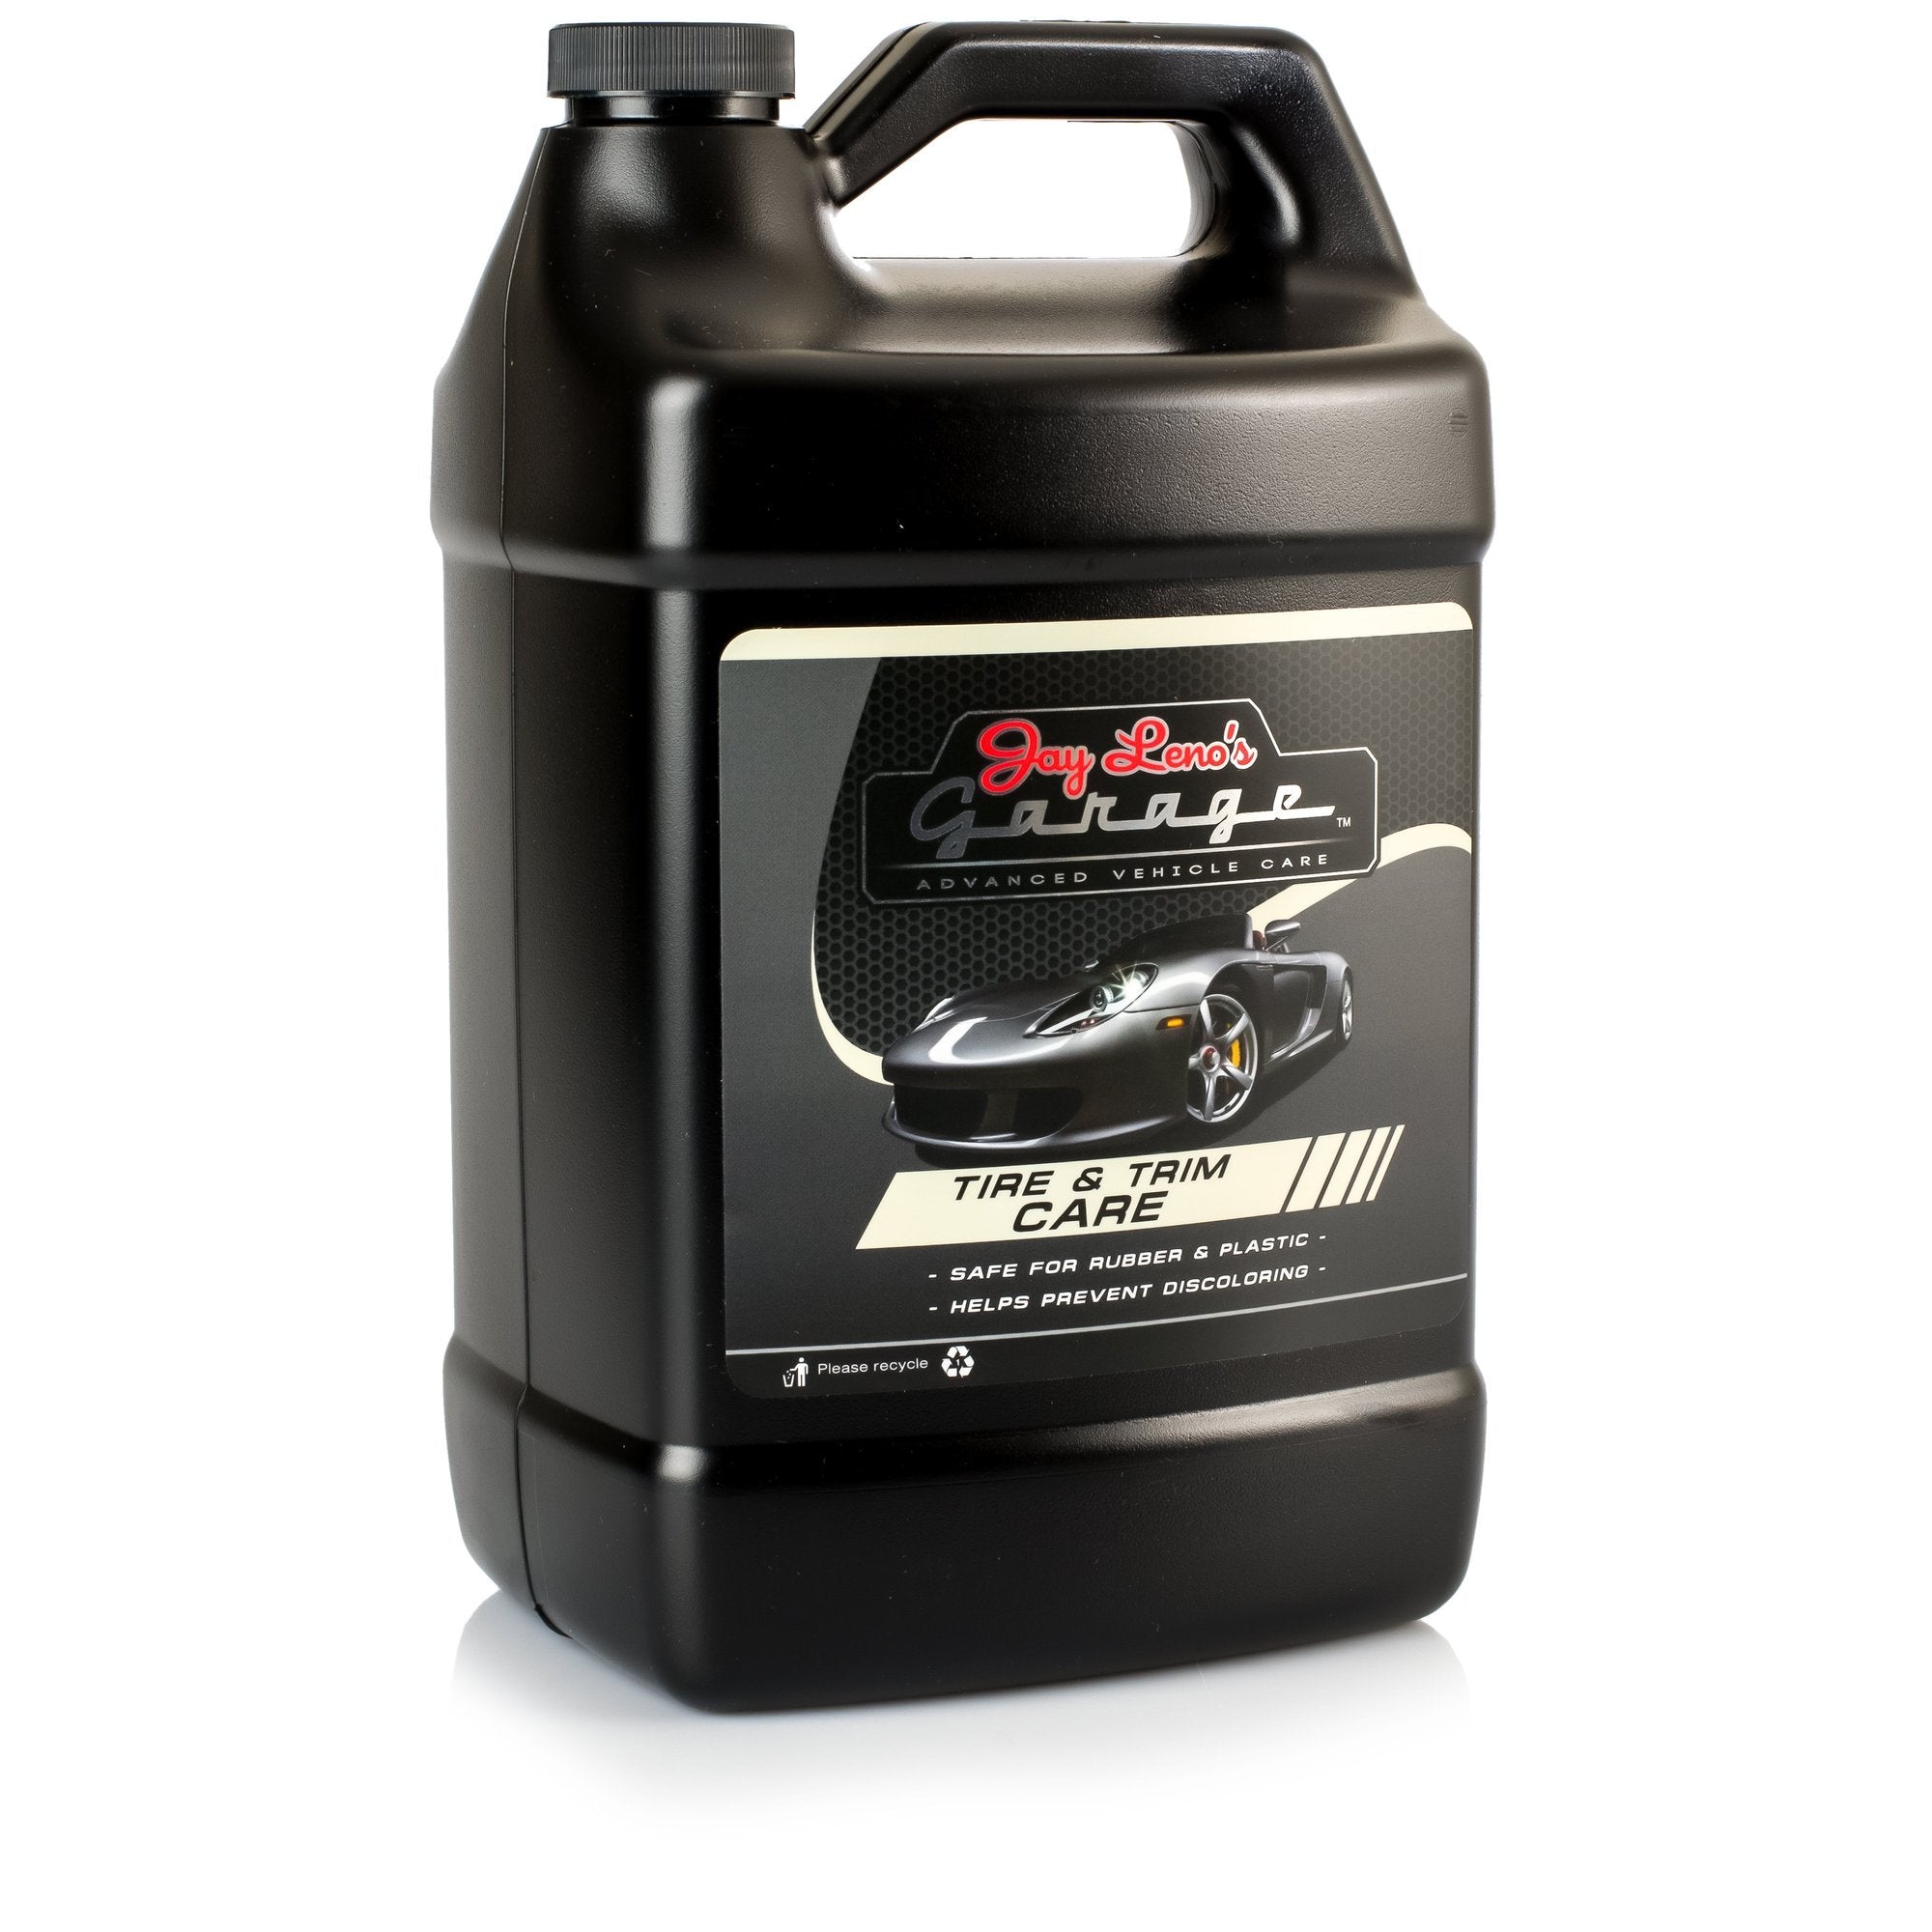 Tire and Trim Care by Jay Leno's Garage - 16oz